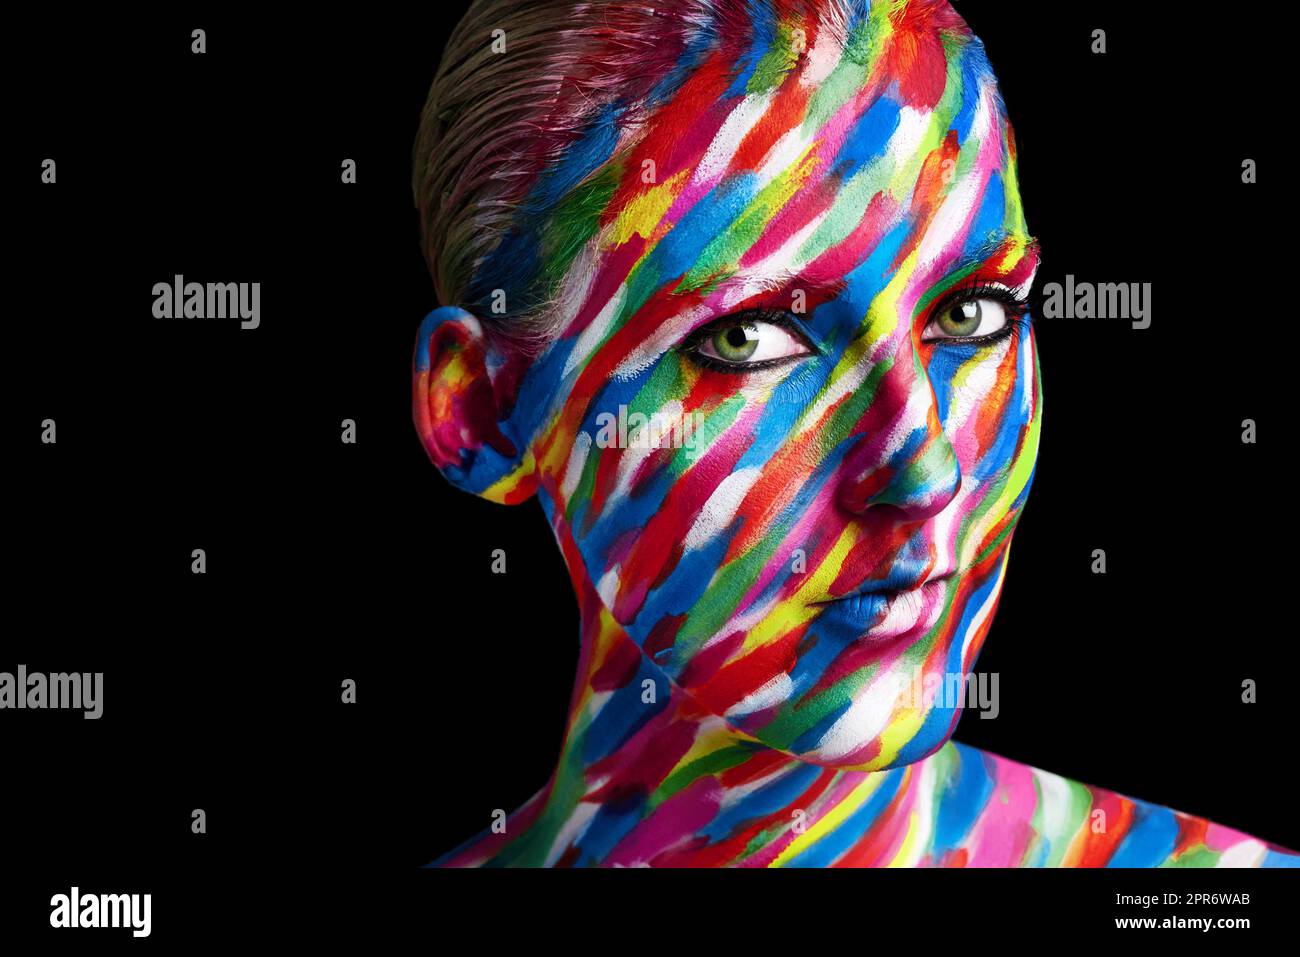 Getting creative with colors. Studio shot of a young woman posing with brightly colored paint on her face against a black background. Stock Photo